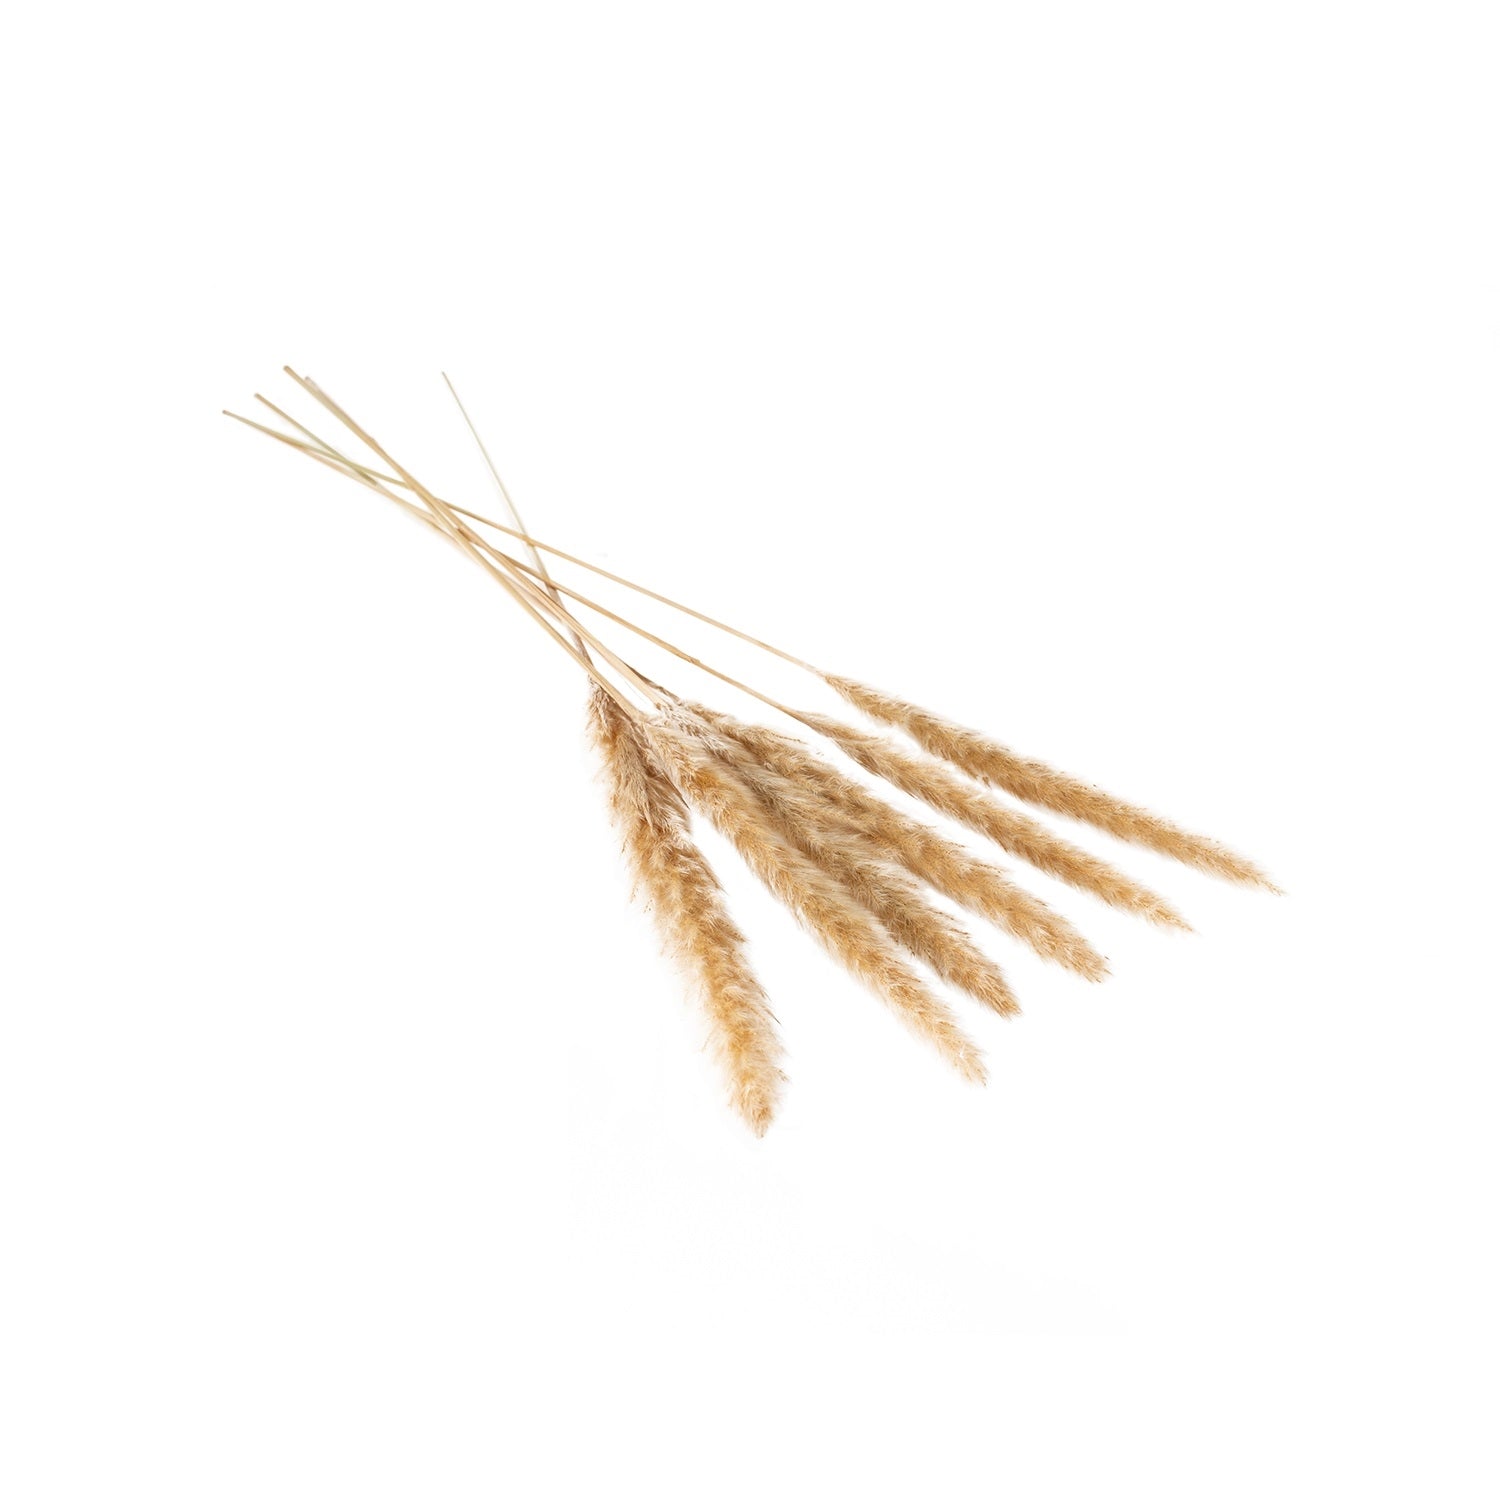 A smooth and fluffy dried pampas grass in white or tan perfect to make that special statement to any room or center piece. These stems are 25.5"-28" tall and can be cut to fit any desired length. Comes in two colors; white and tan. Sold as a pack of 6 stems.